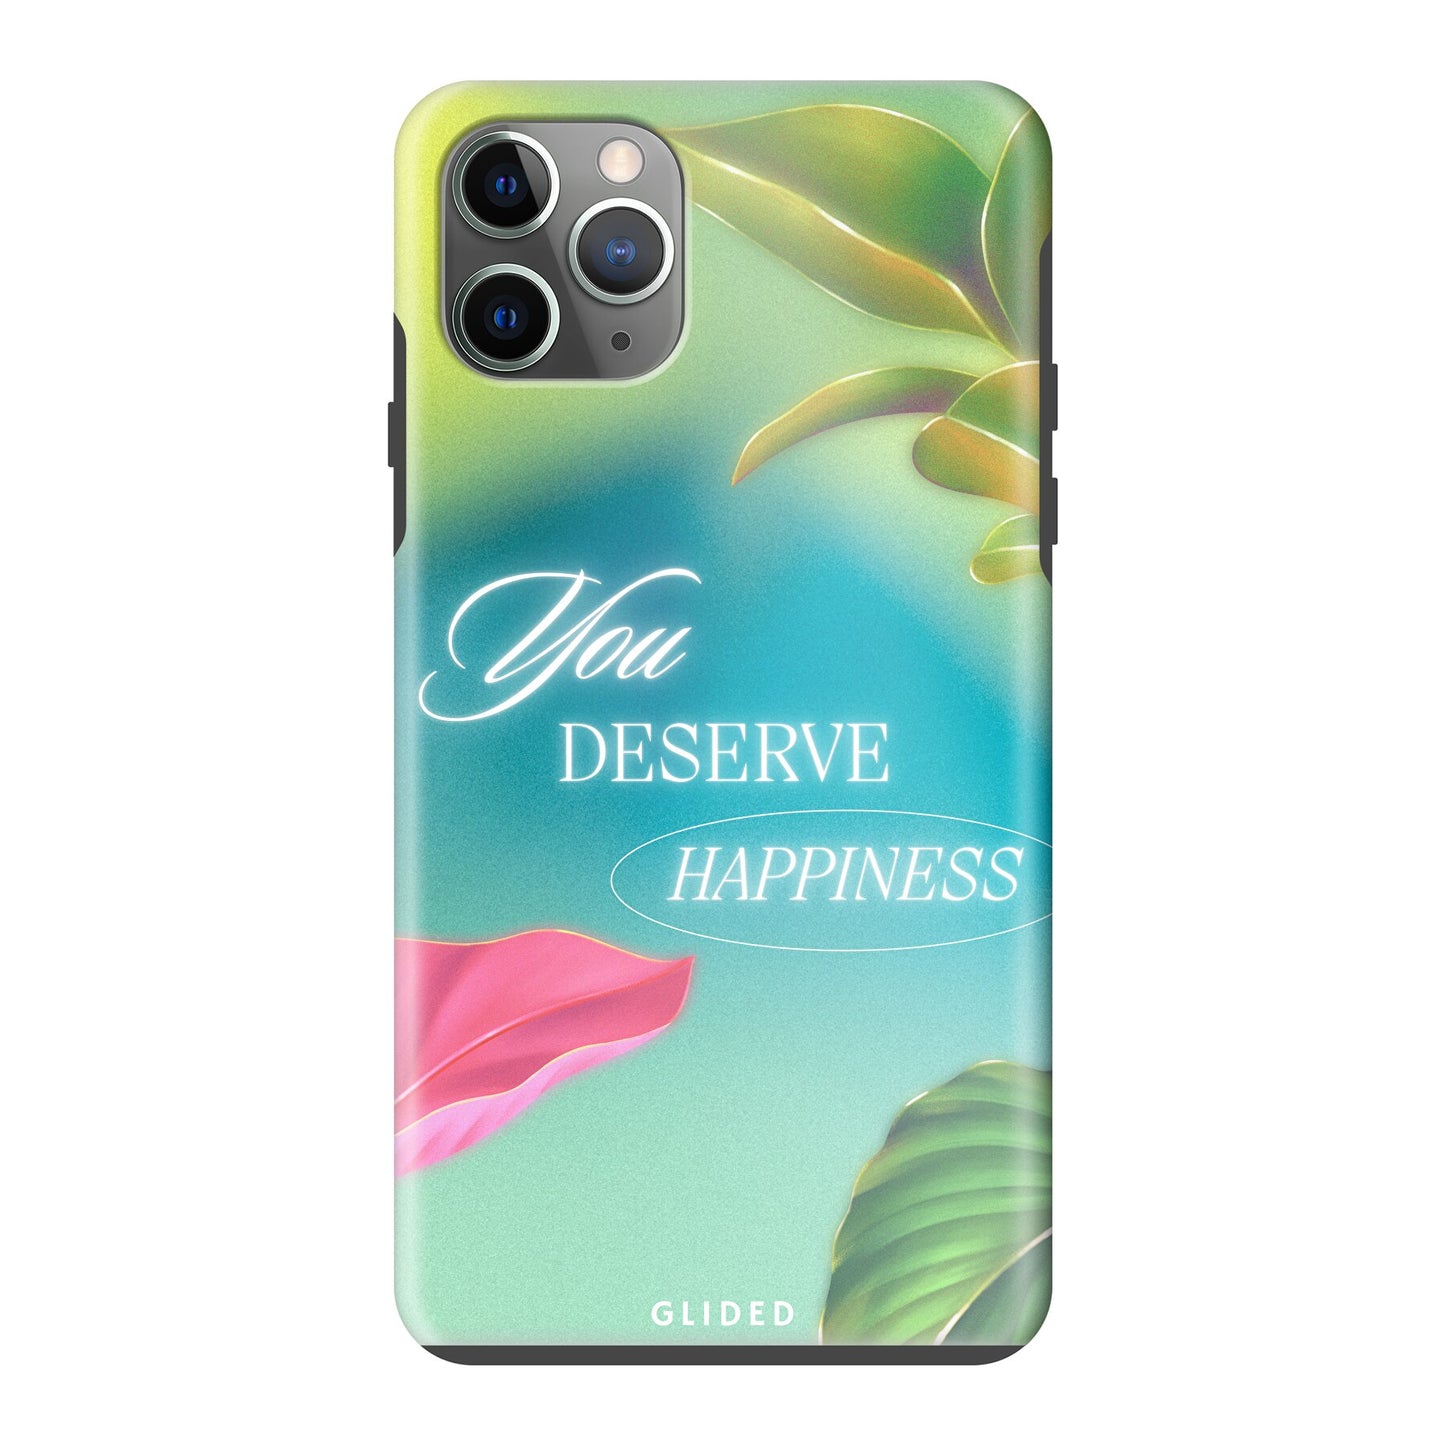 Happiness - iPhone 11 Pro Max - Tough case